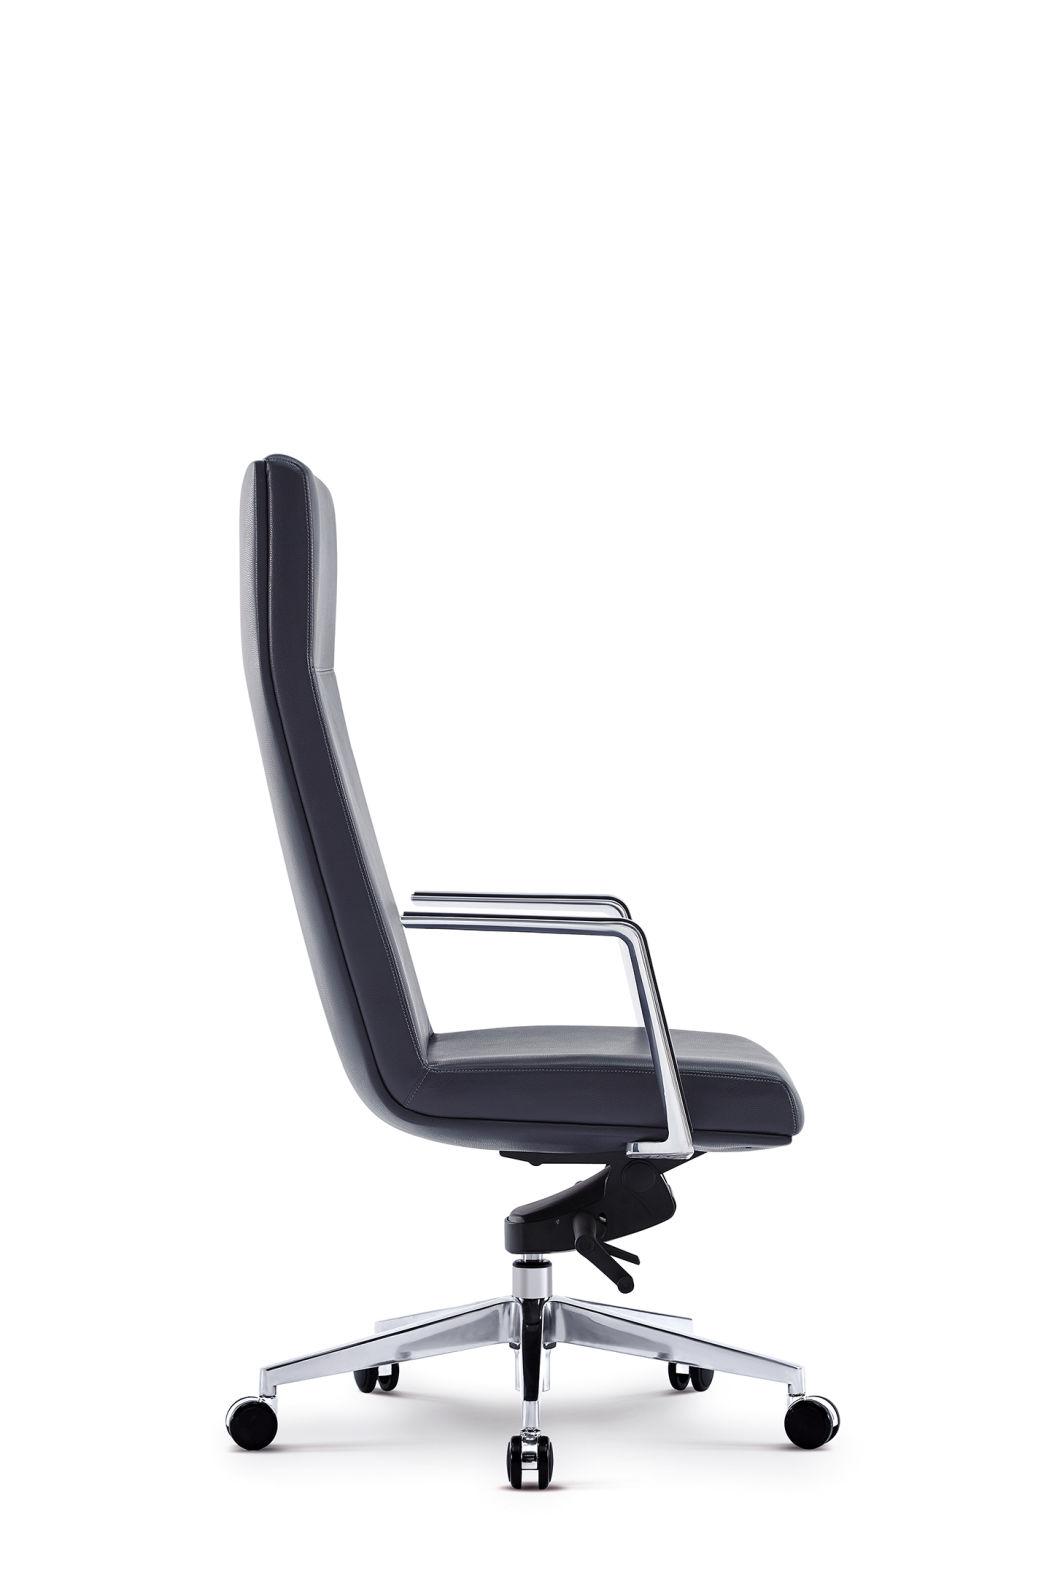 Yifa High Quality Modern Office Chairs for Home Office Room